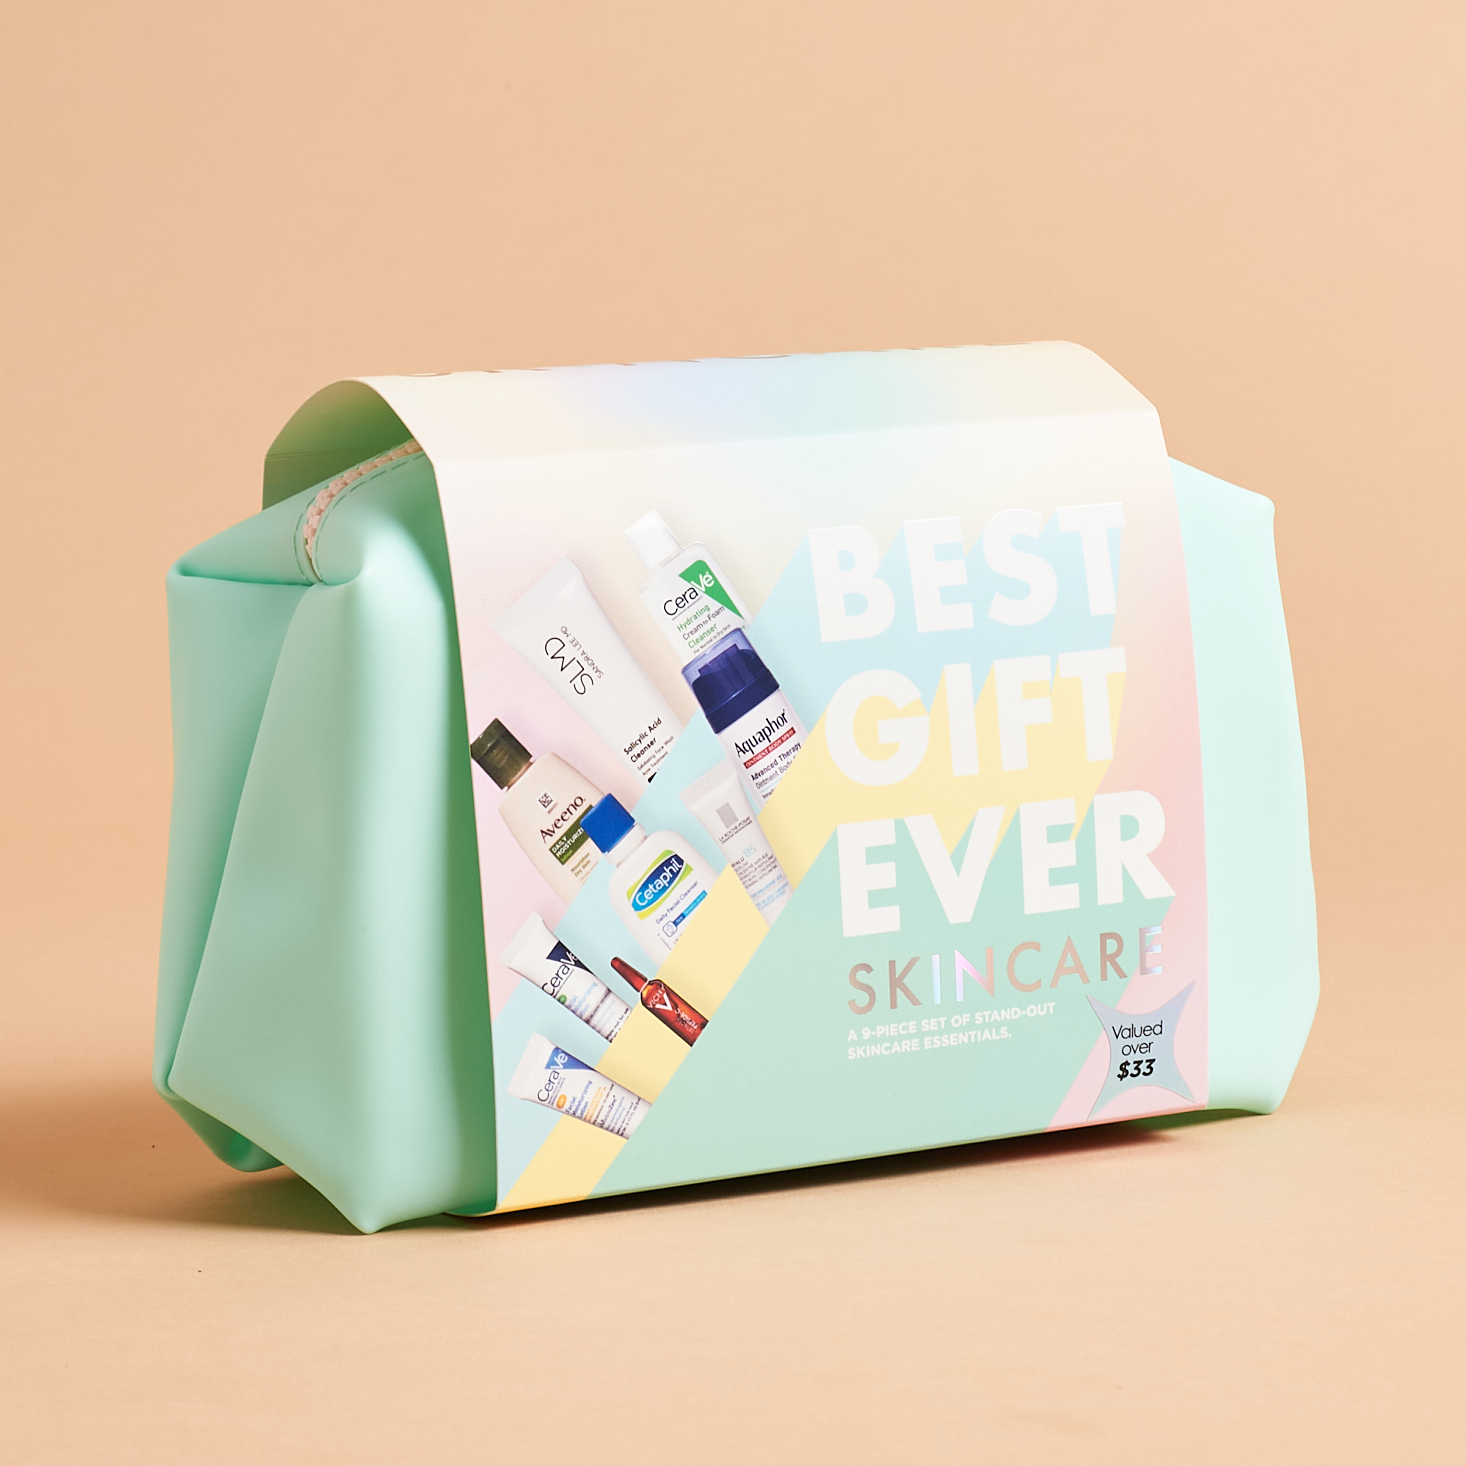 Target “Best of Skincare” Beauty Box Review – December 2020